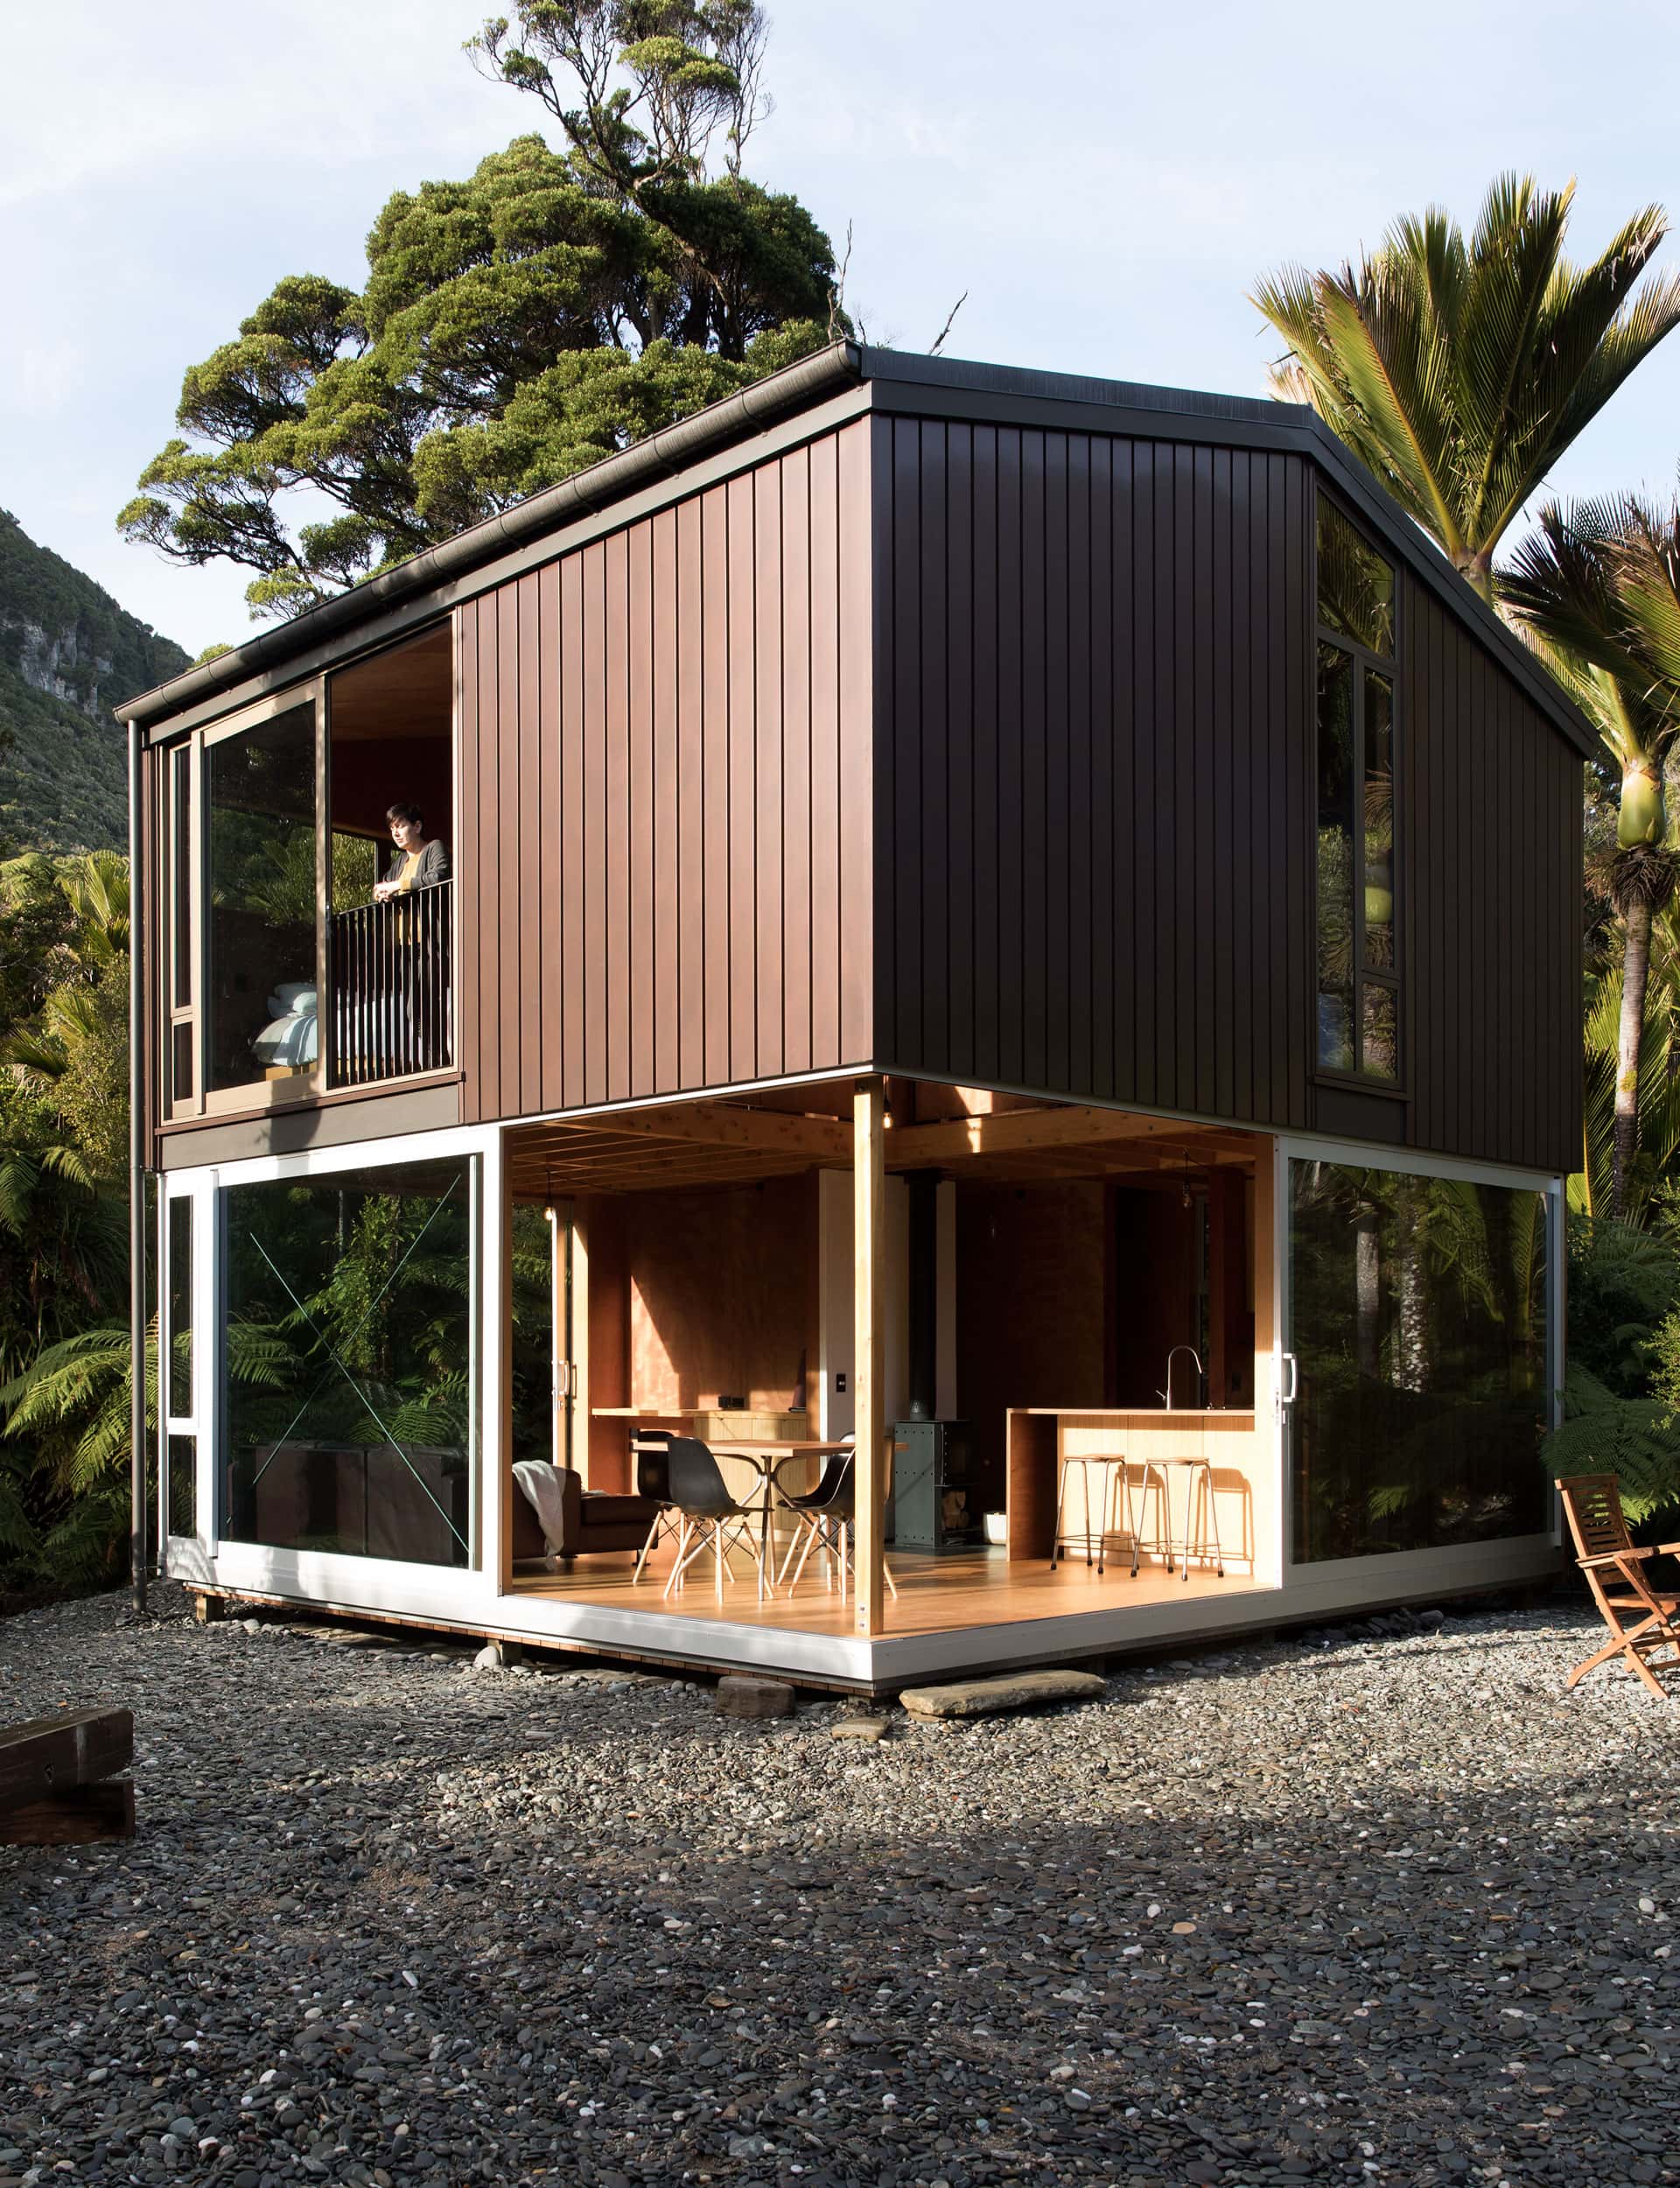 Nestled in a nikau glade this tiny home by Upoko Architects was designed to impose as little as possible on the site.  Image: David Straight 